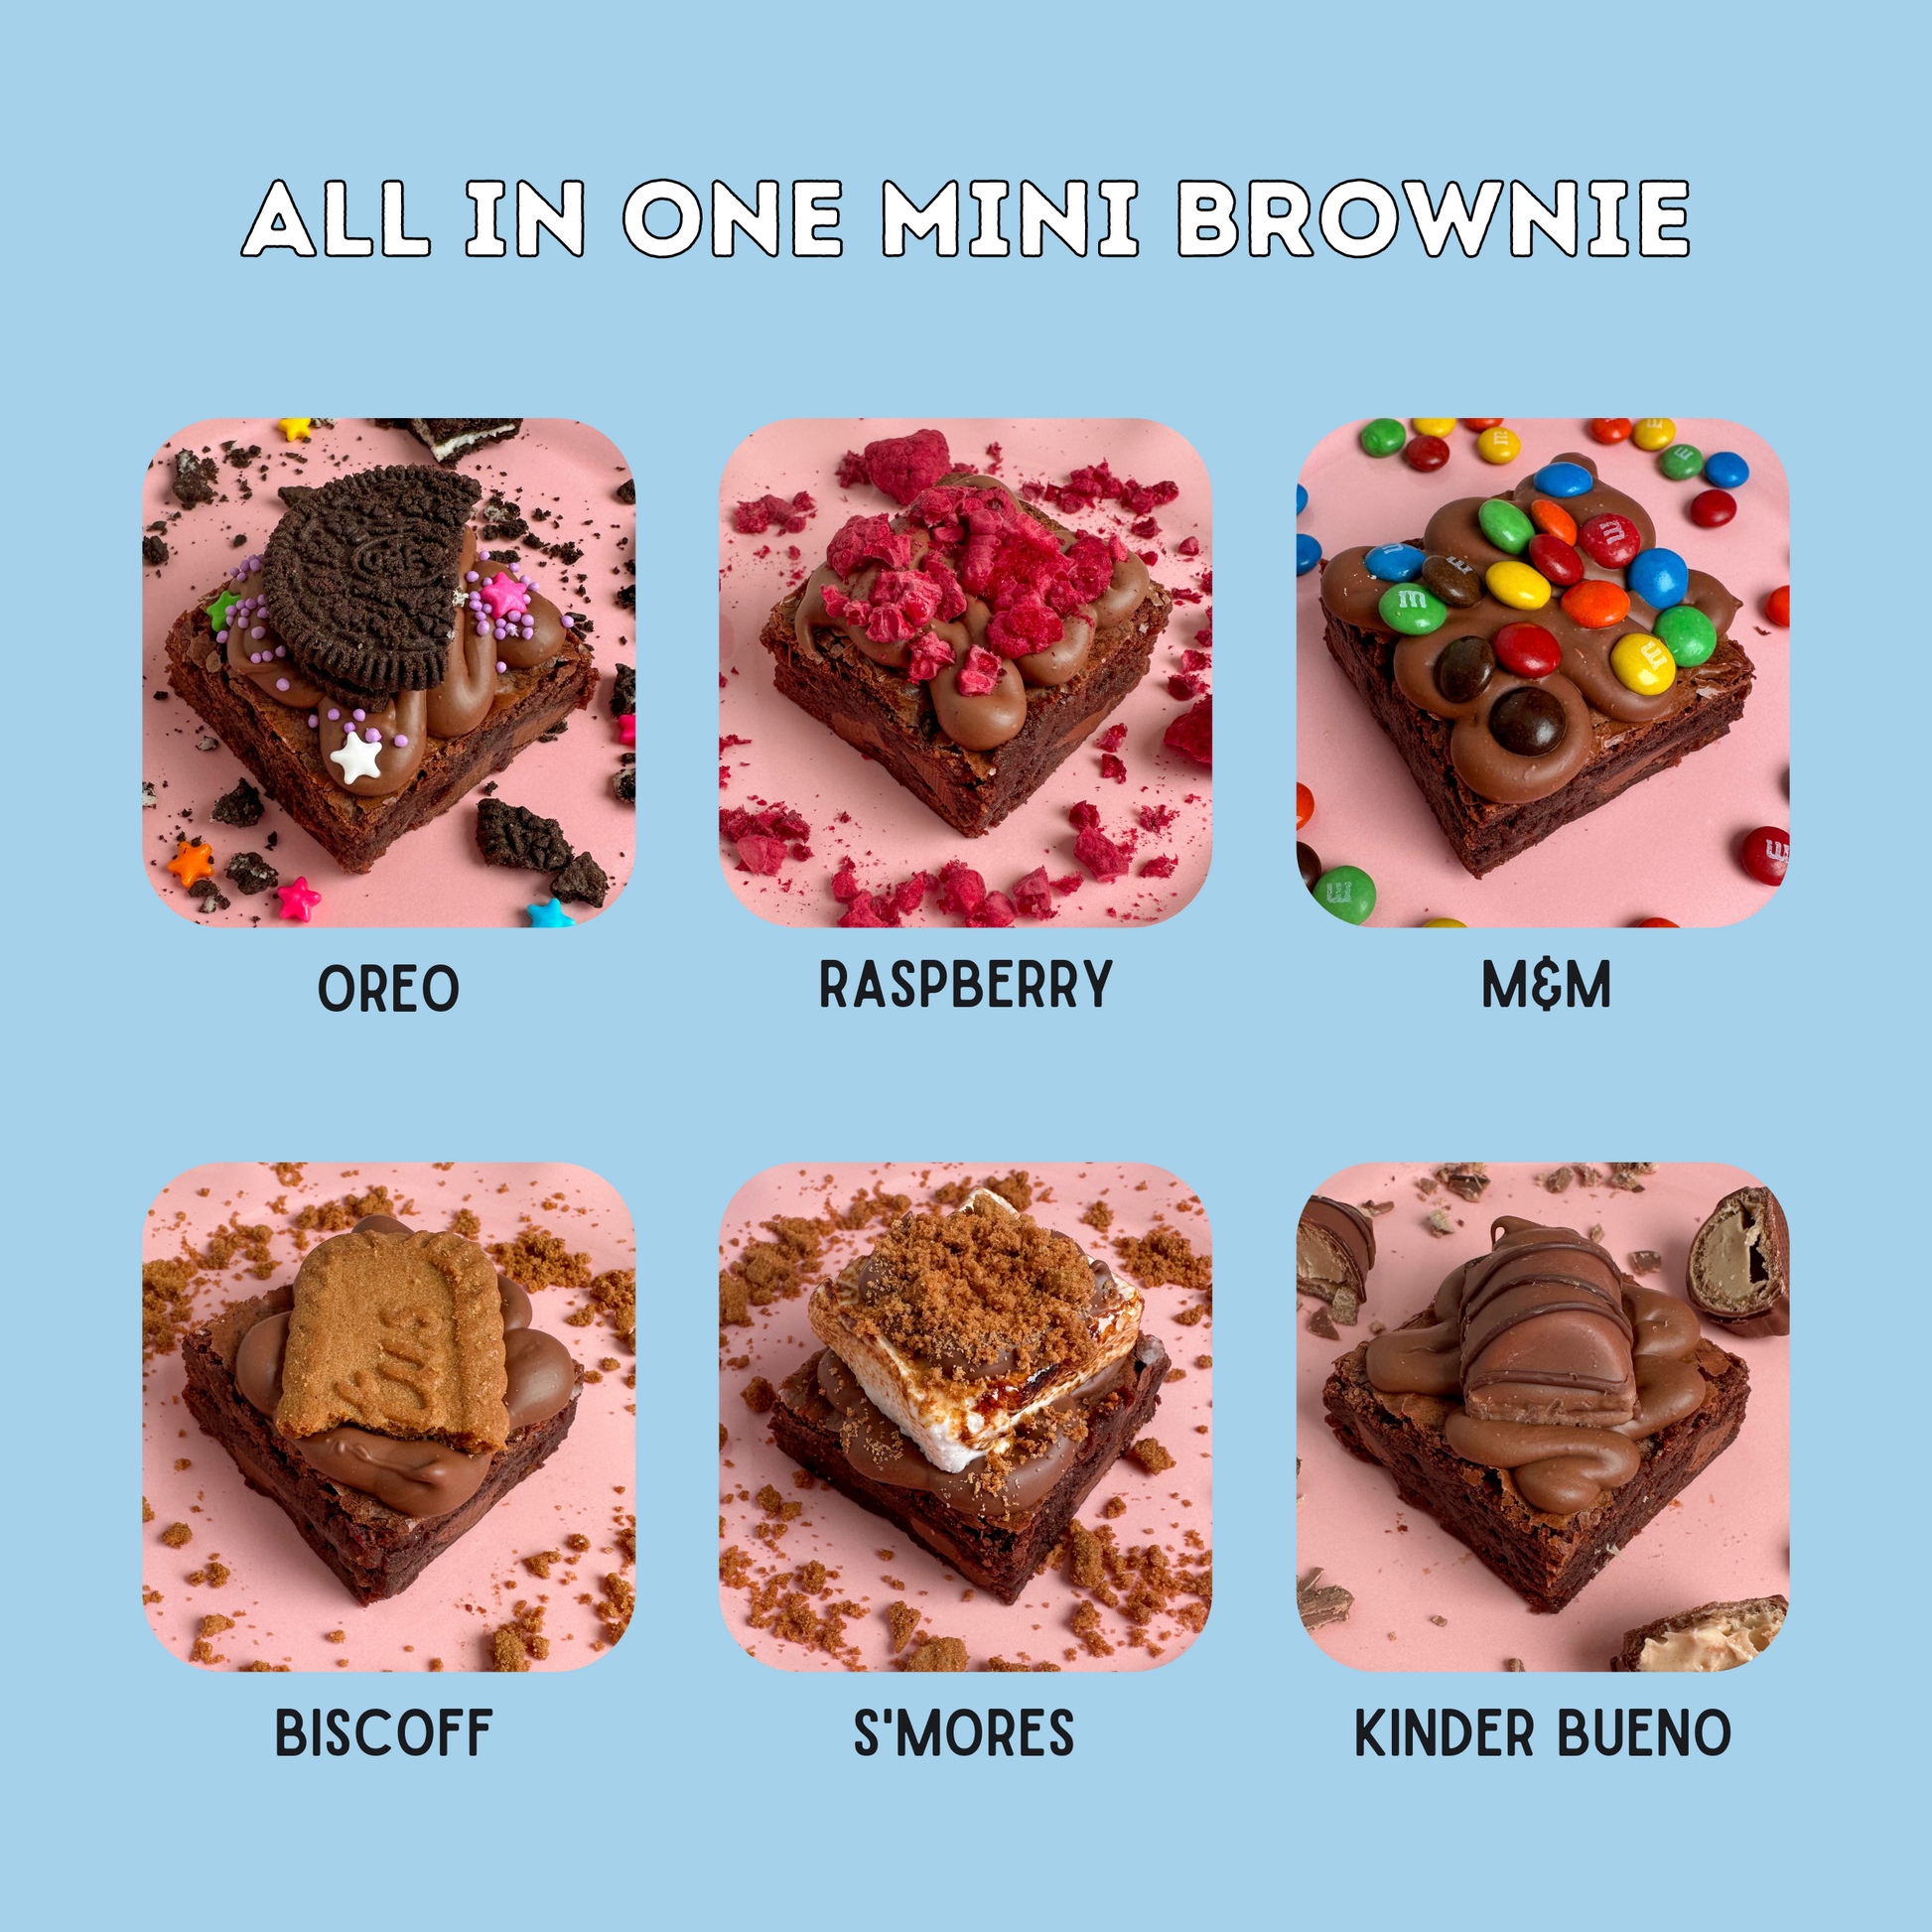 All in one mini brownie - topped with oreo, raspberry, M&M, biscoff, s'mores and Kinder bueno